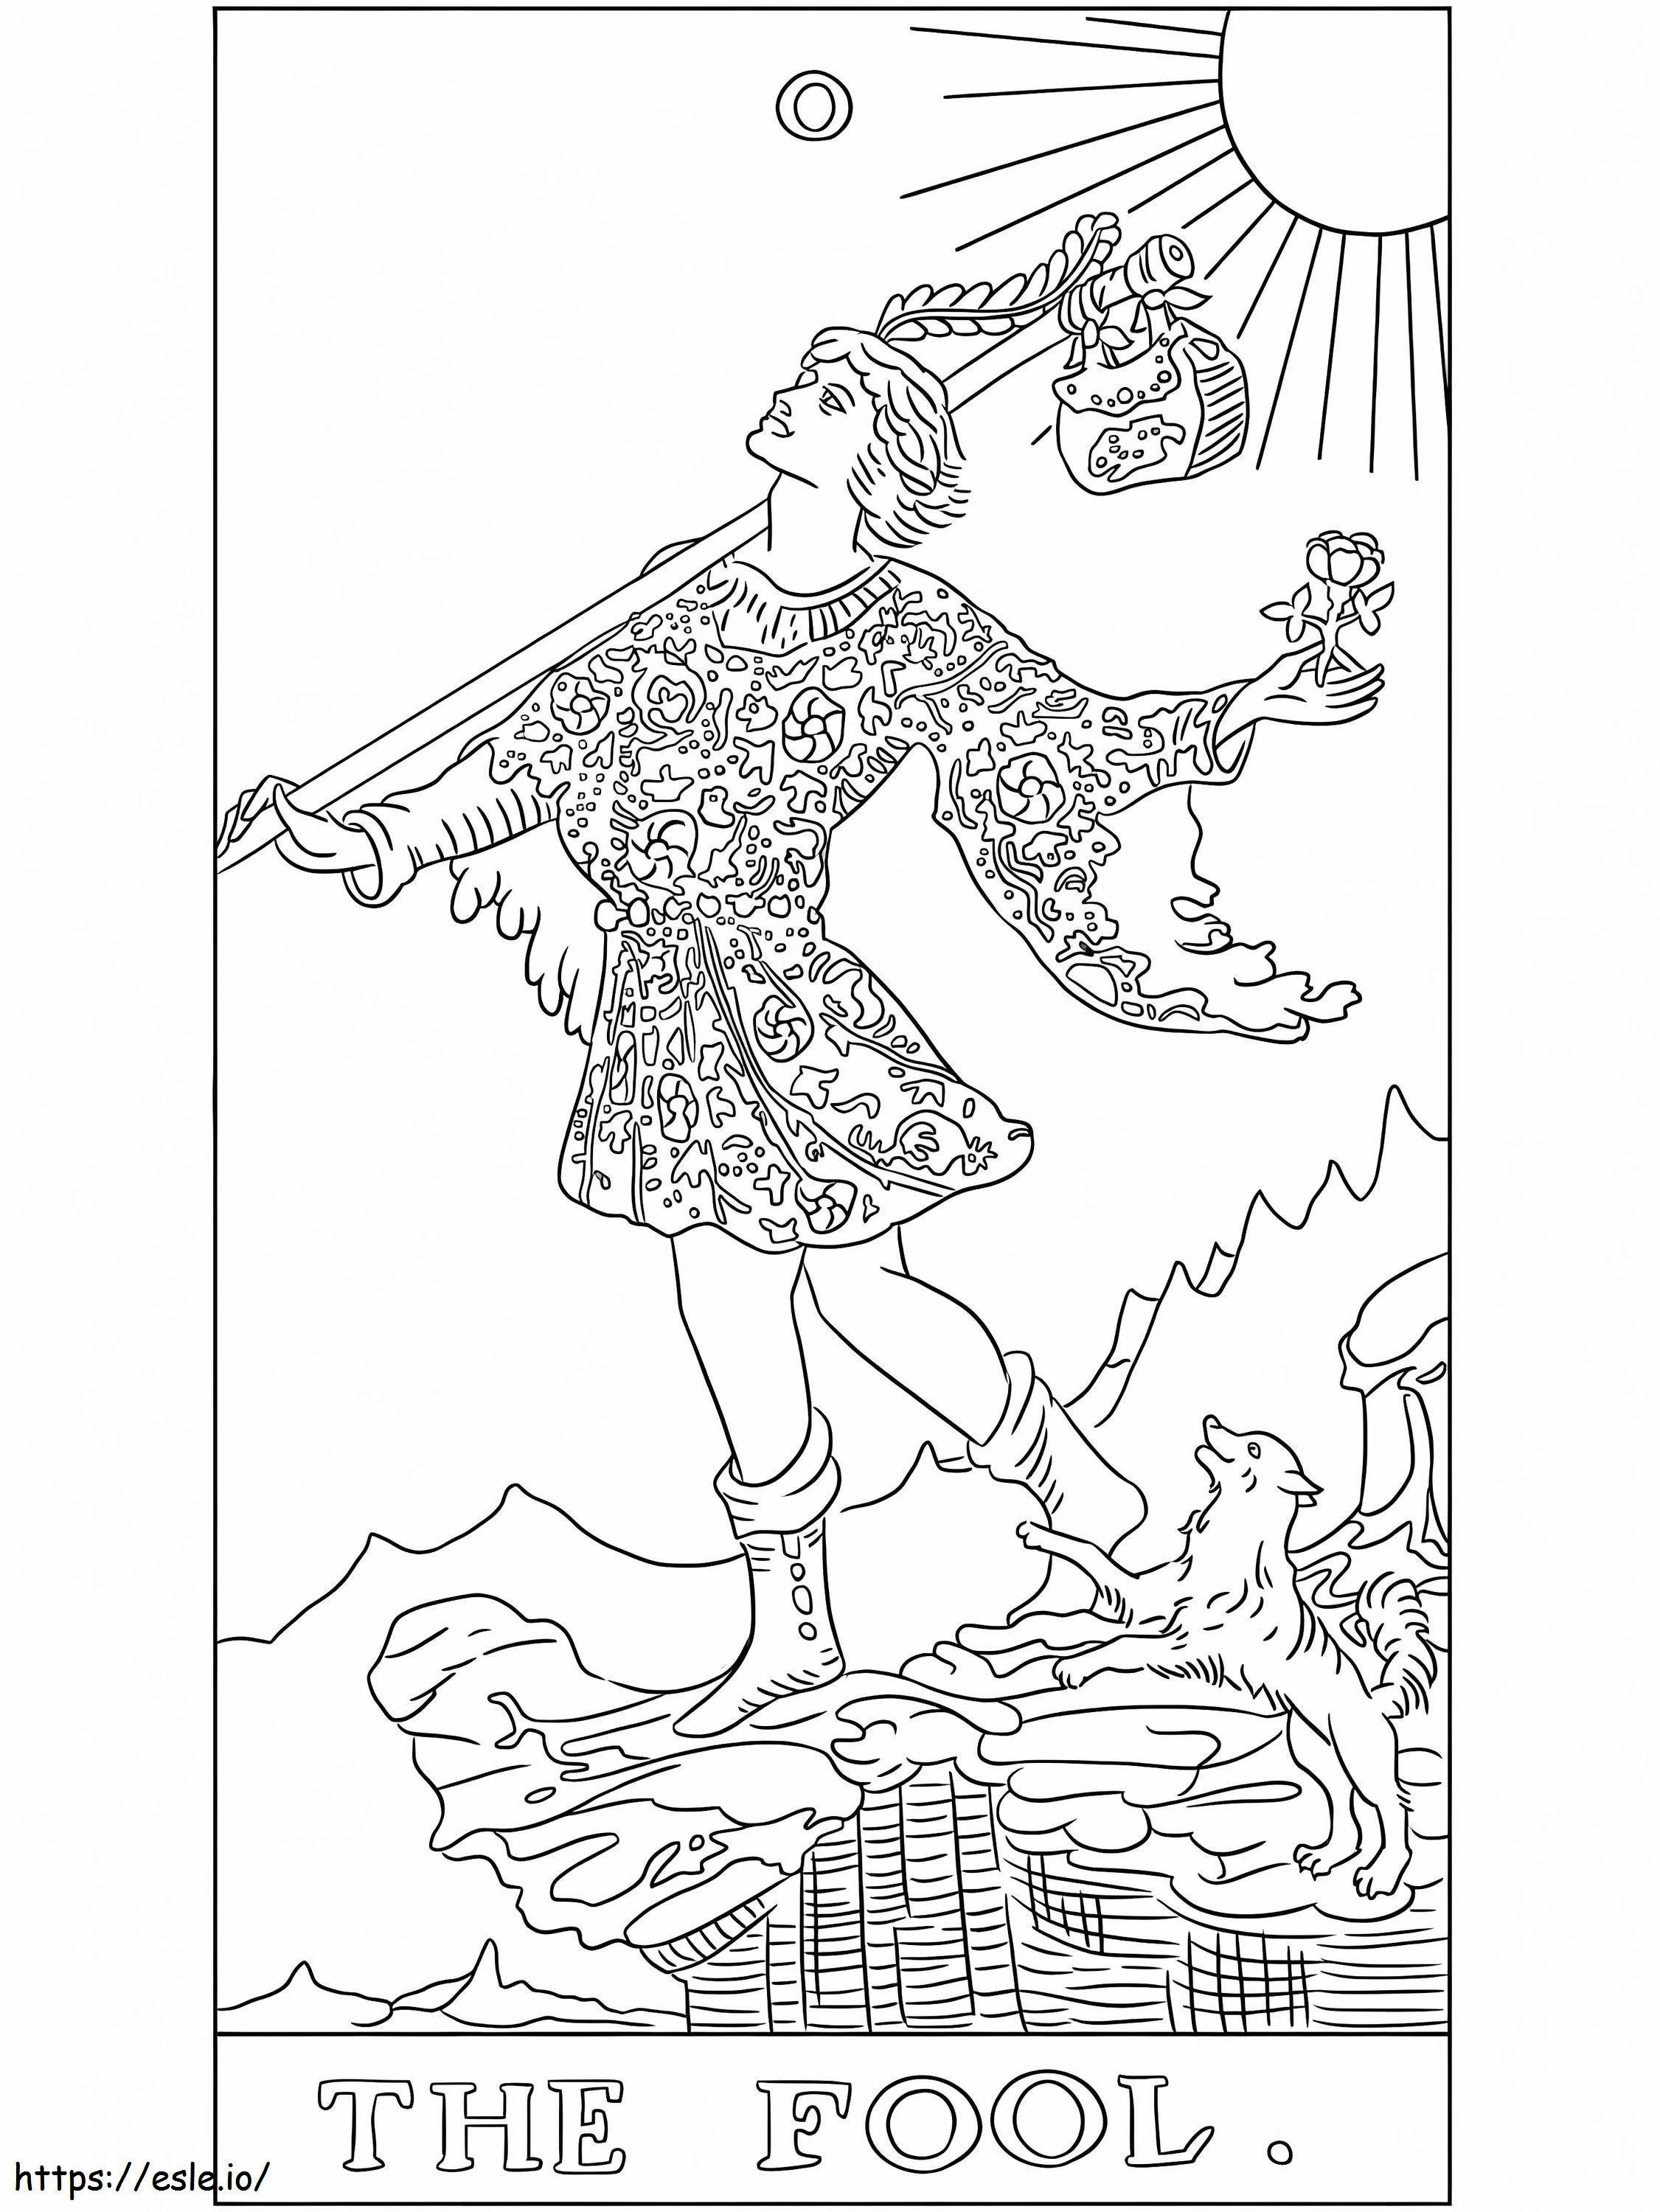 Tarot The Fool coloring page